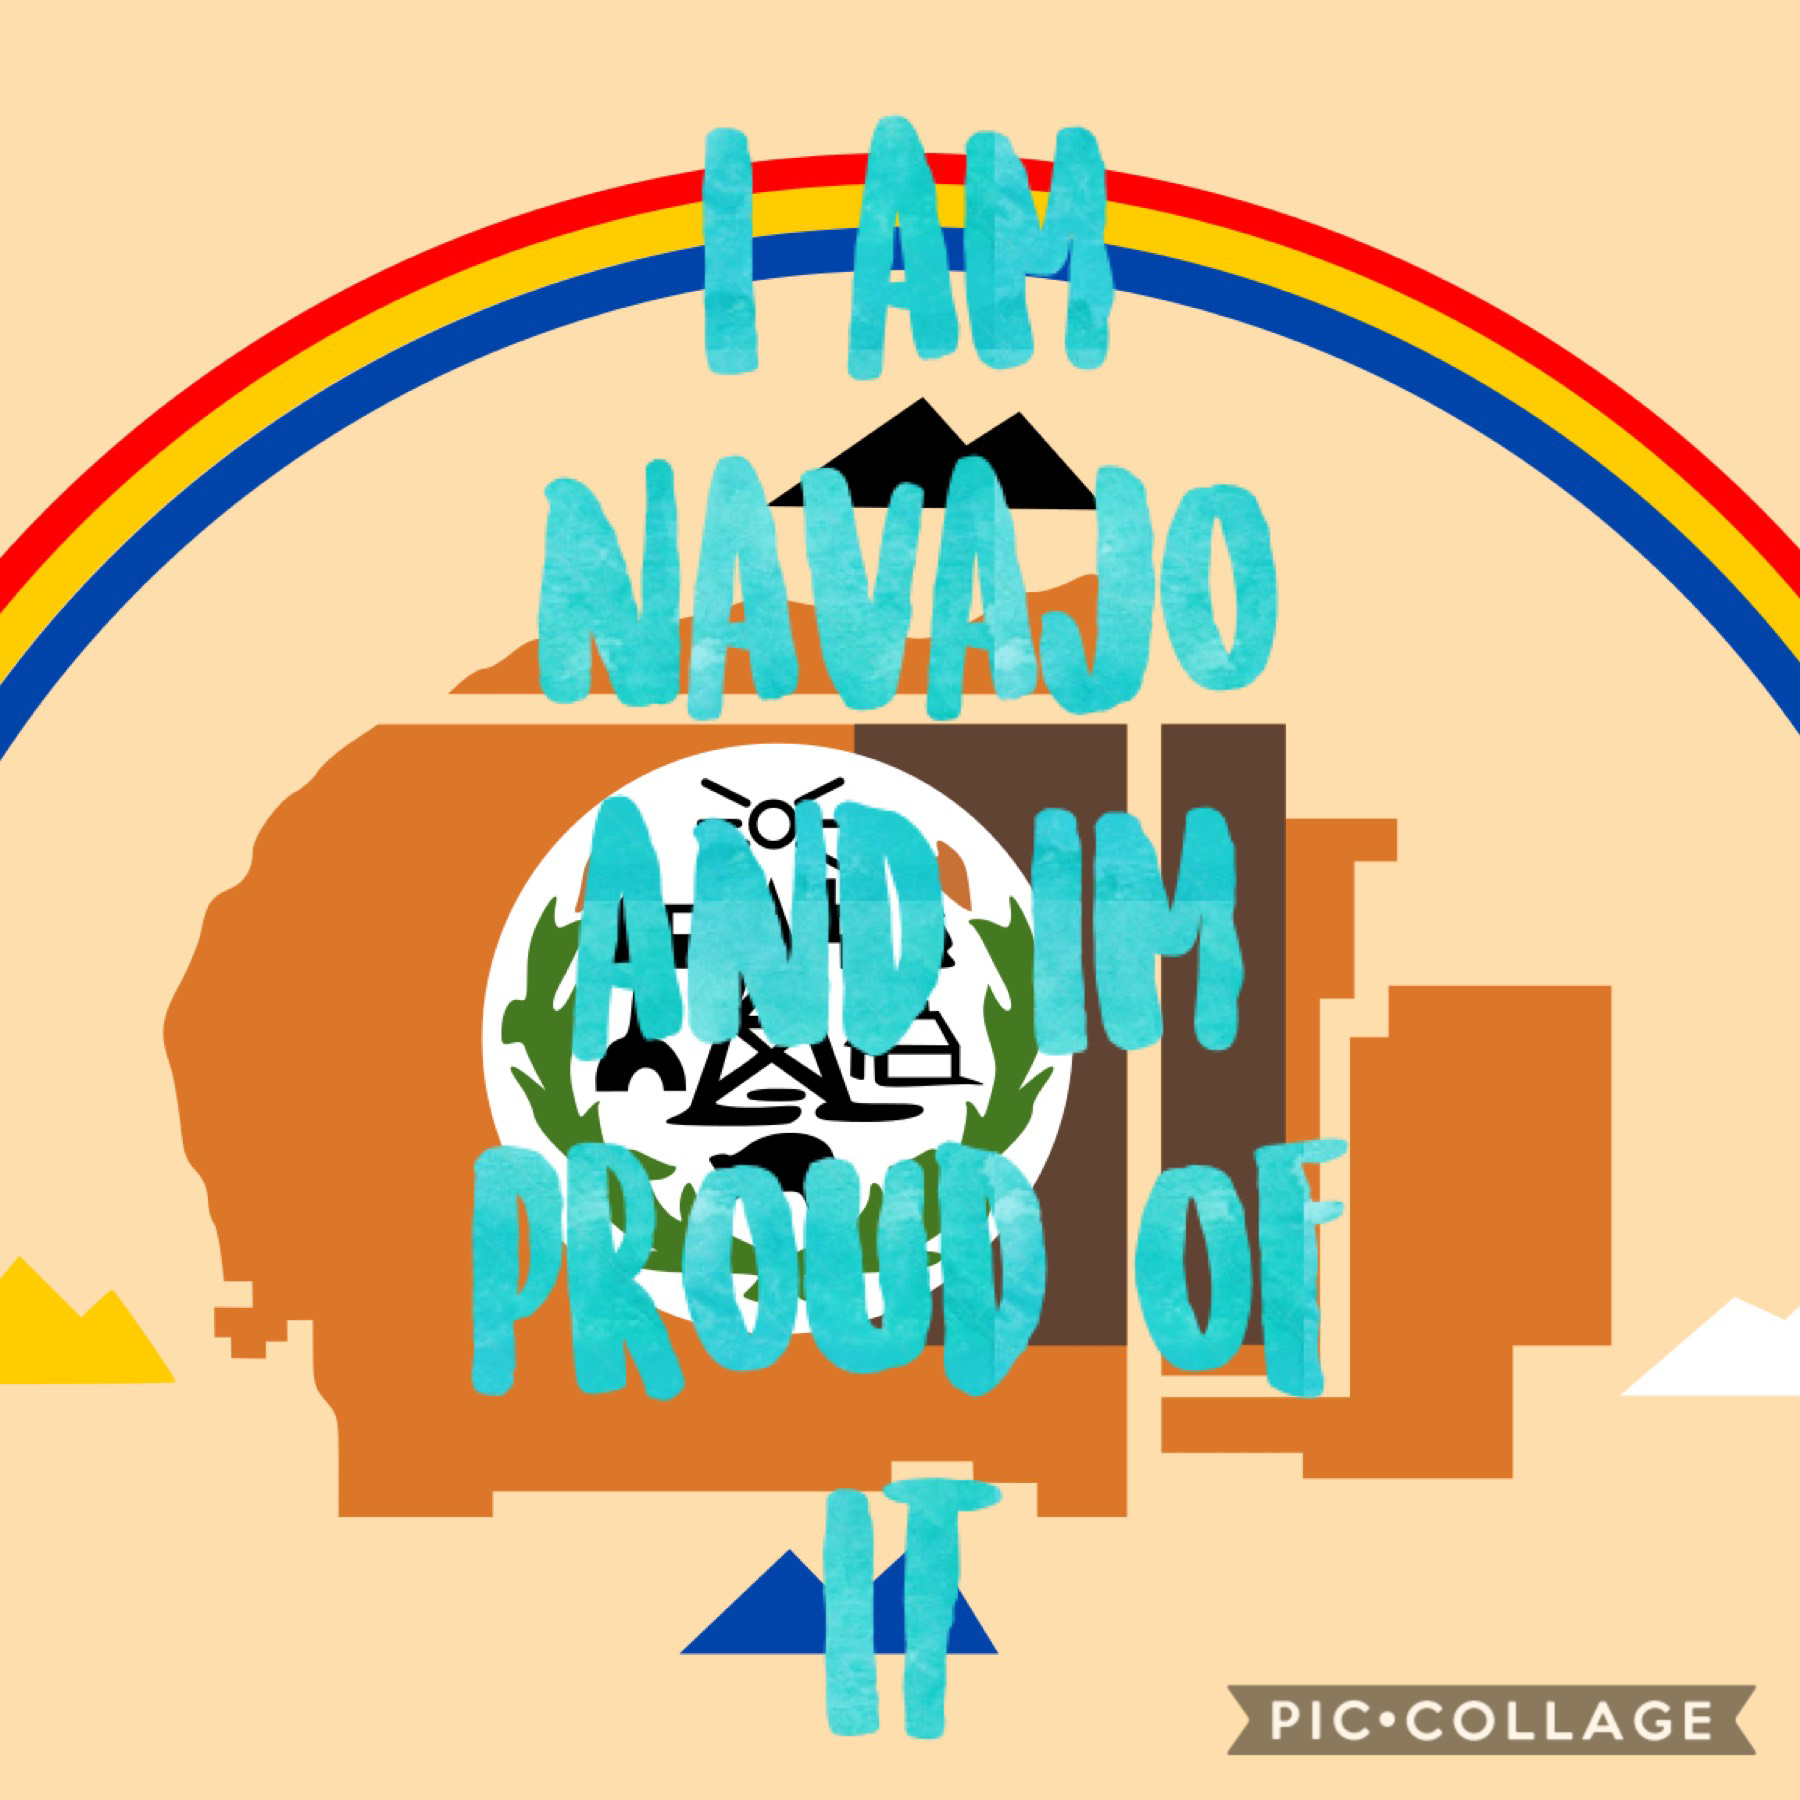 I’m Navajo and it’s pronounced Nav a hoe and don’t make fun of it please and it’s a Native American tribe and no it doesn’t mean I’m Indian 